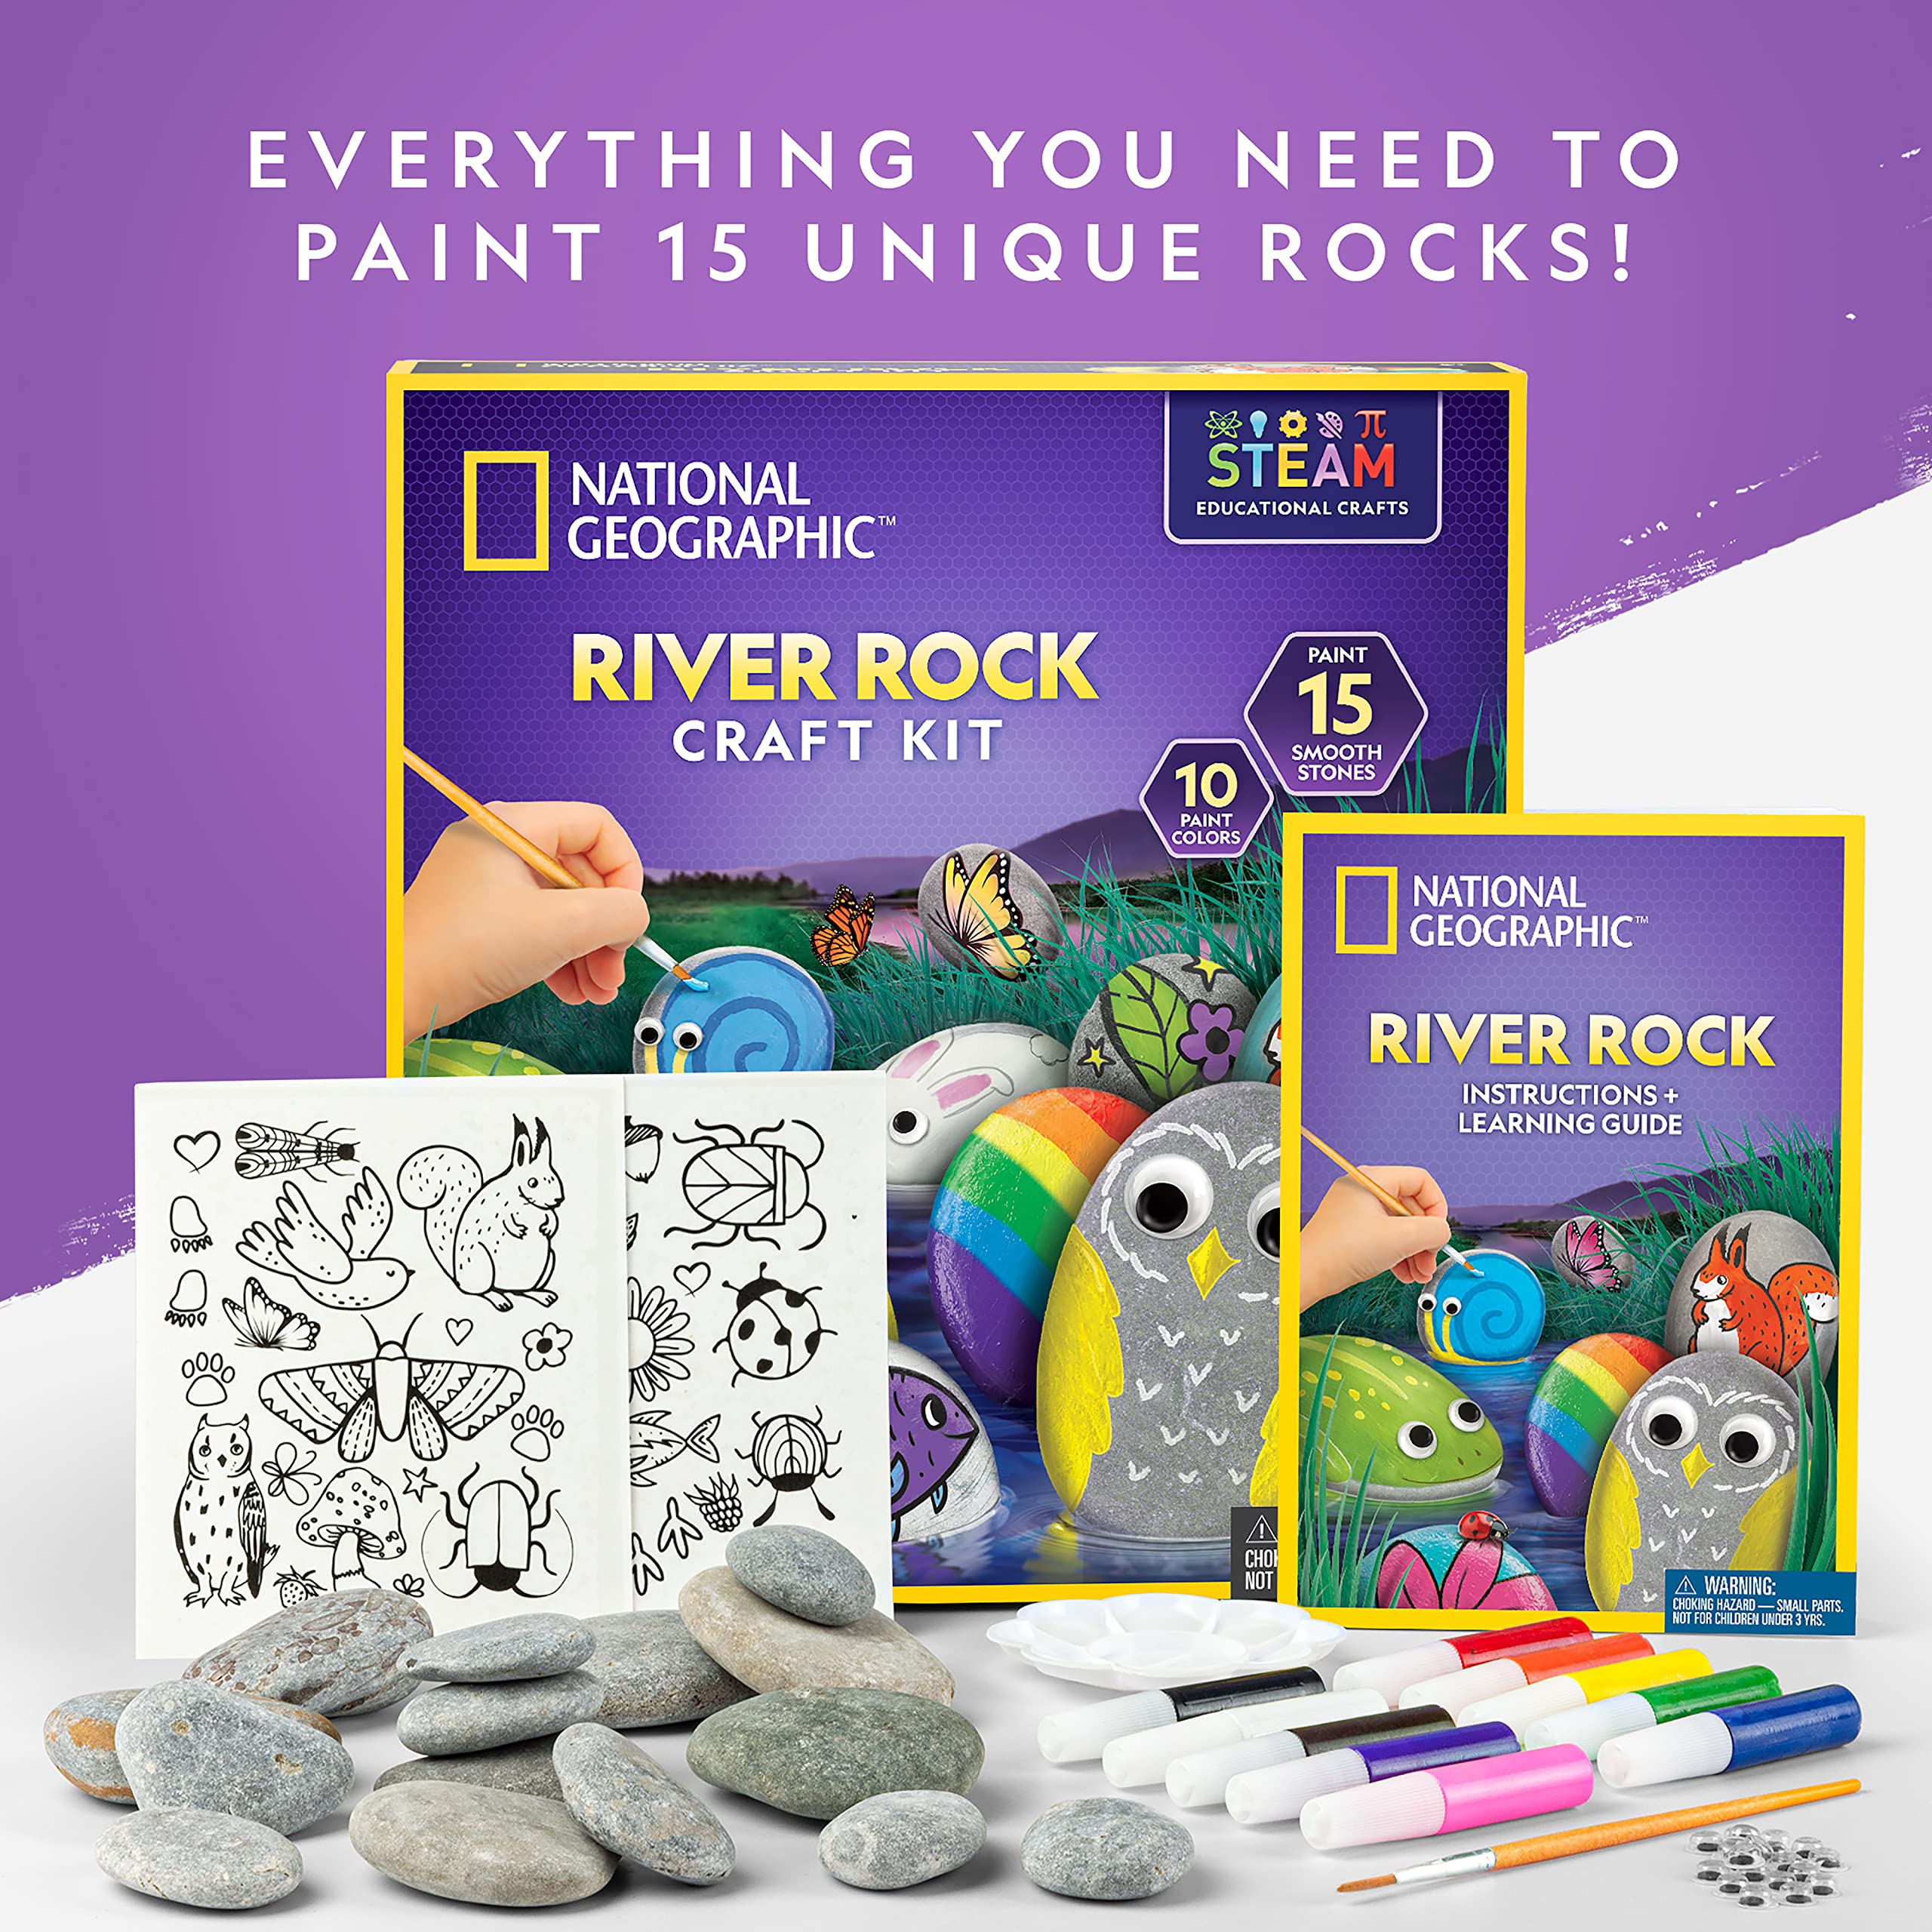 NATIONAL GEOGRAPHIC Rock Painting Kit - Arts & Crafts Kit for Kids, Paint & Decorate 15 River Rocks with 10 Paint Colors & More Art Supplies, Kids Craft, Outdoor Toys, Activity Kit